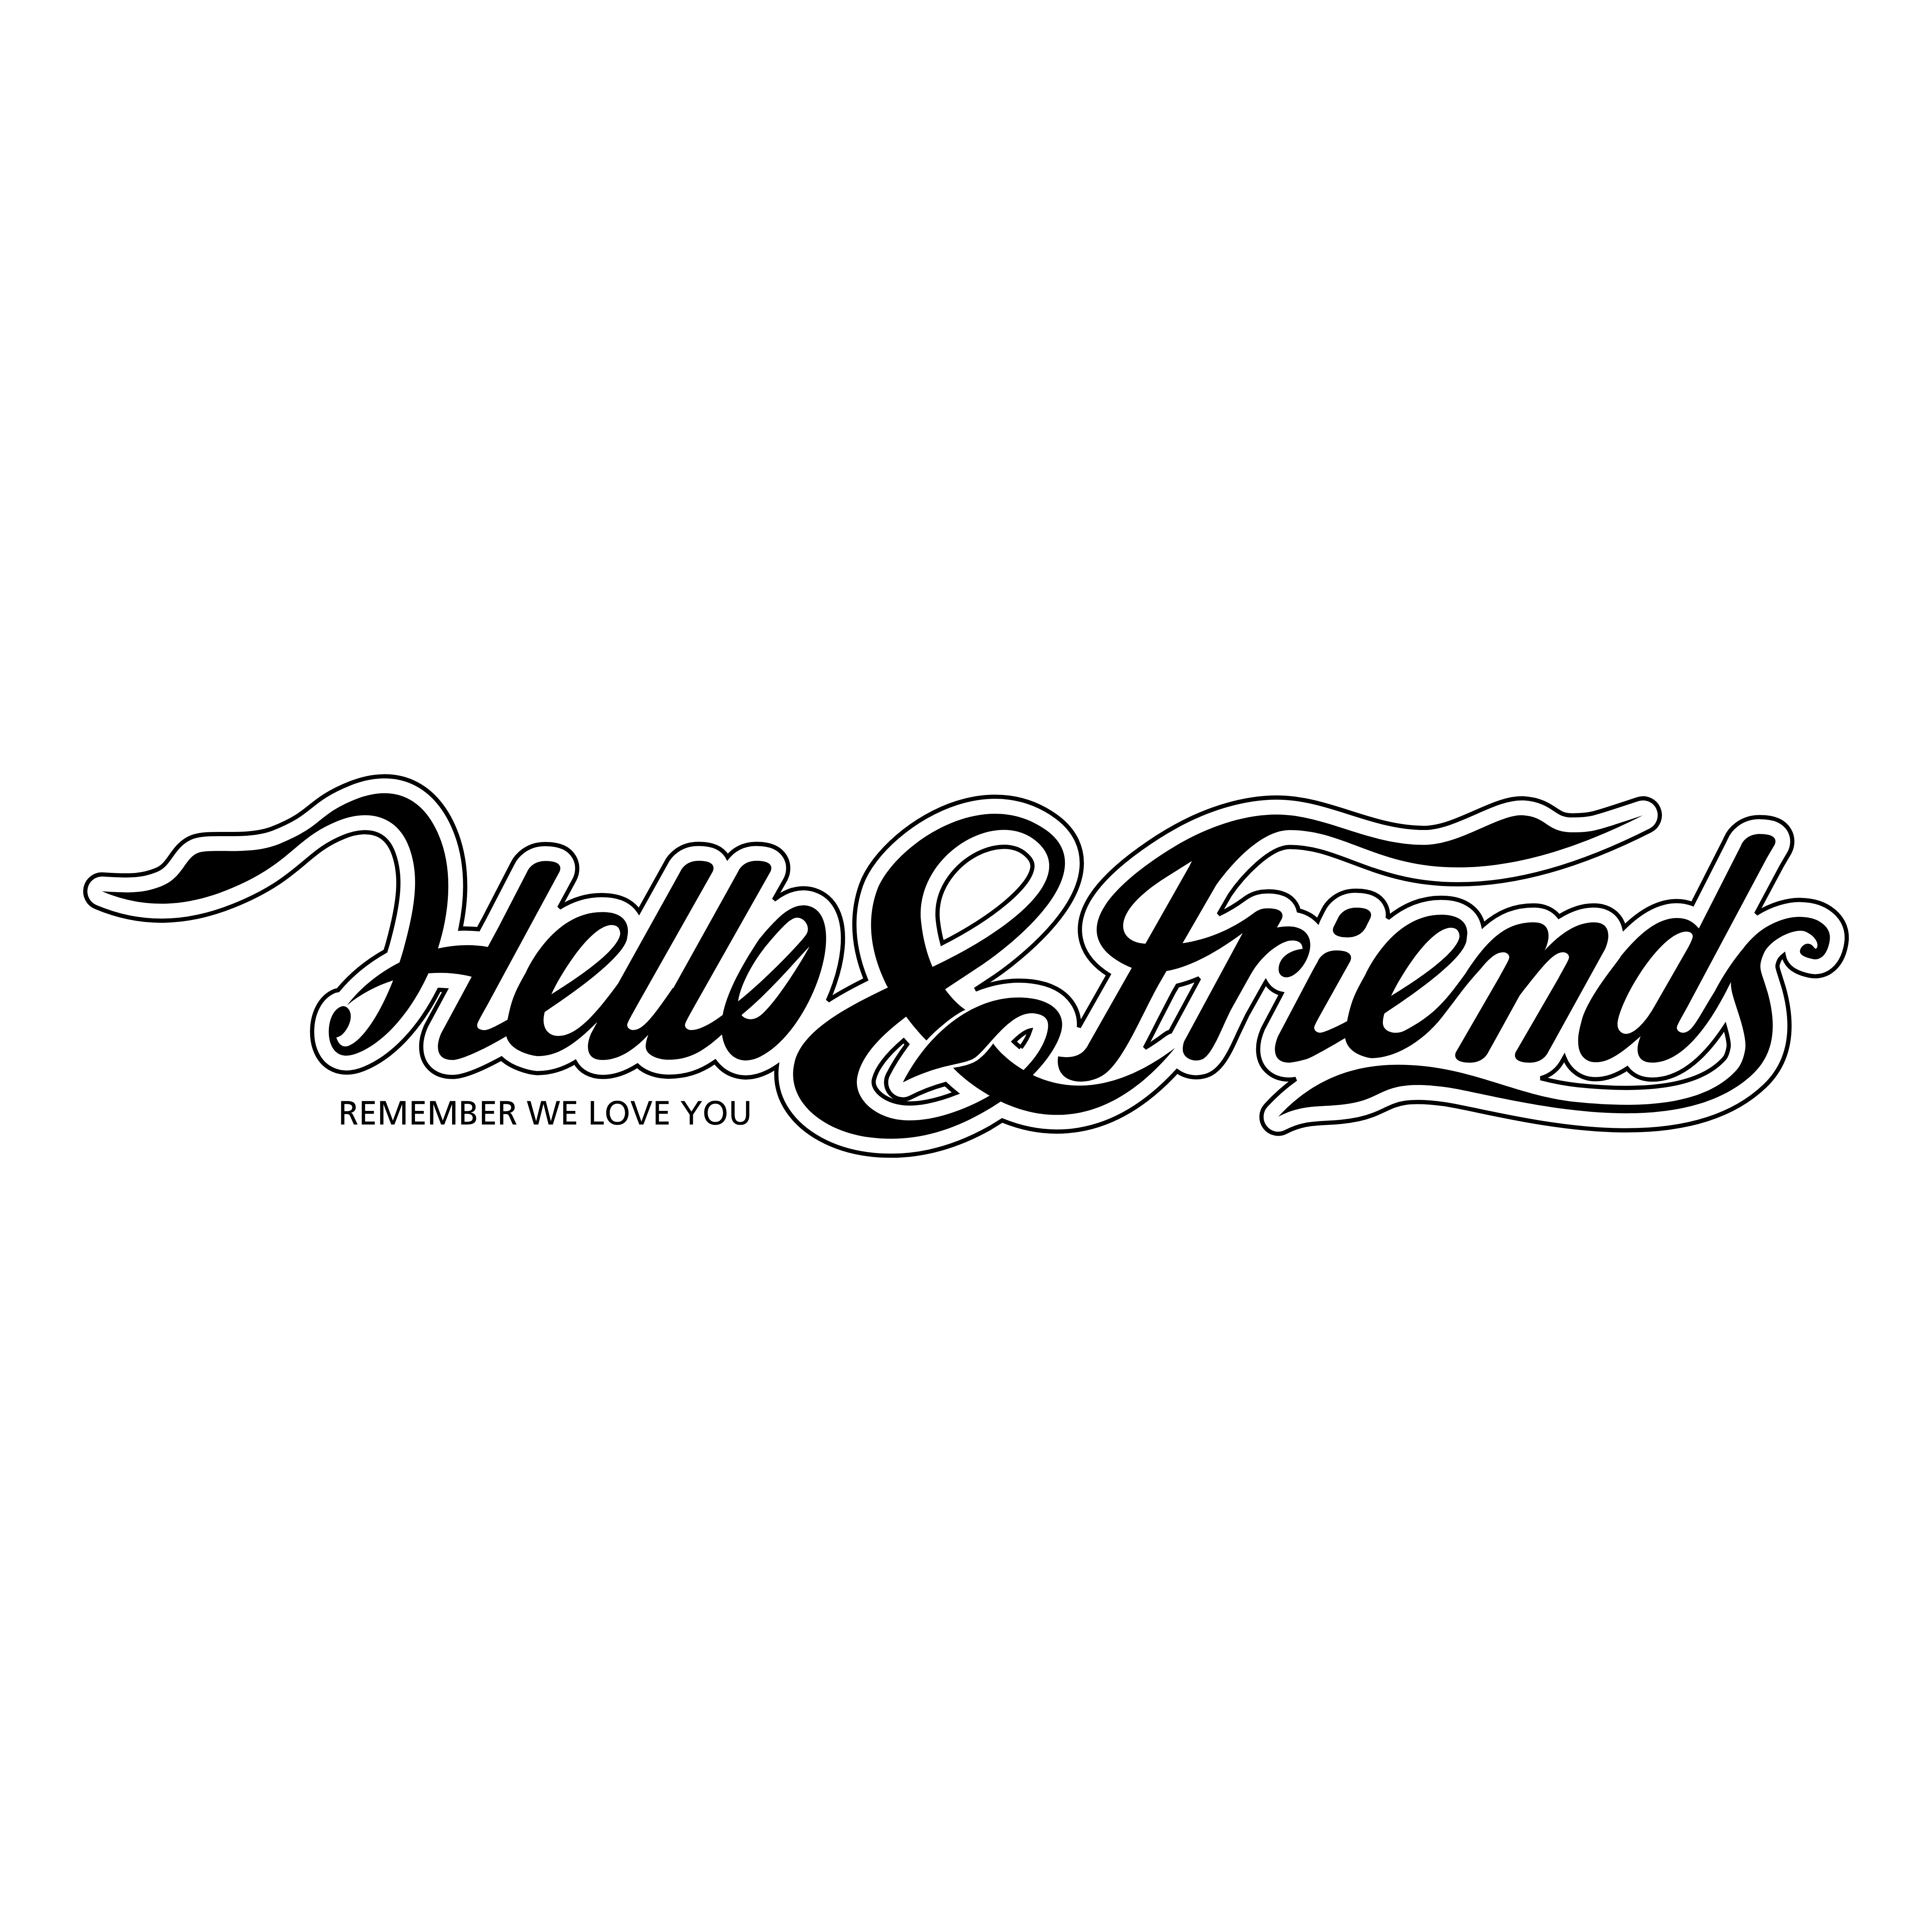 Download Hello And Friends Logos Download